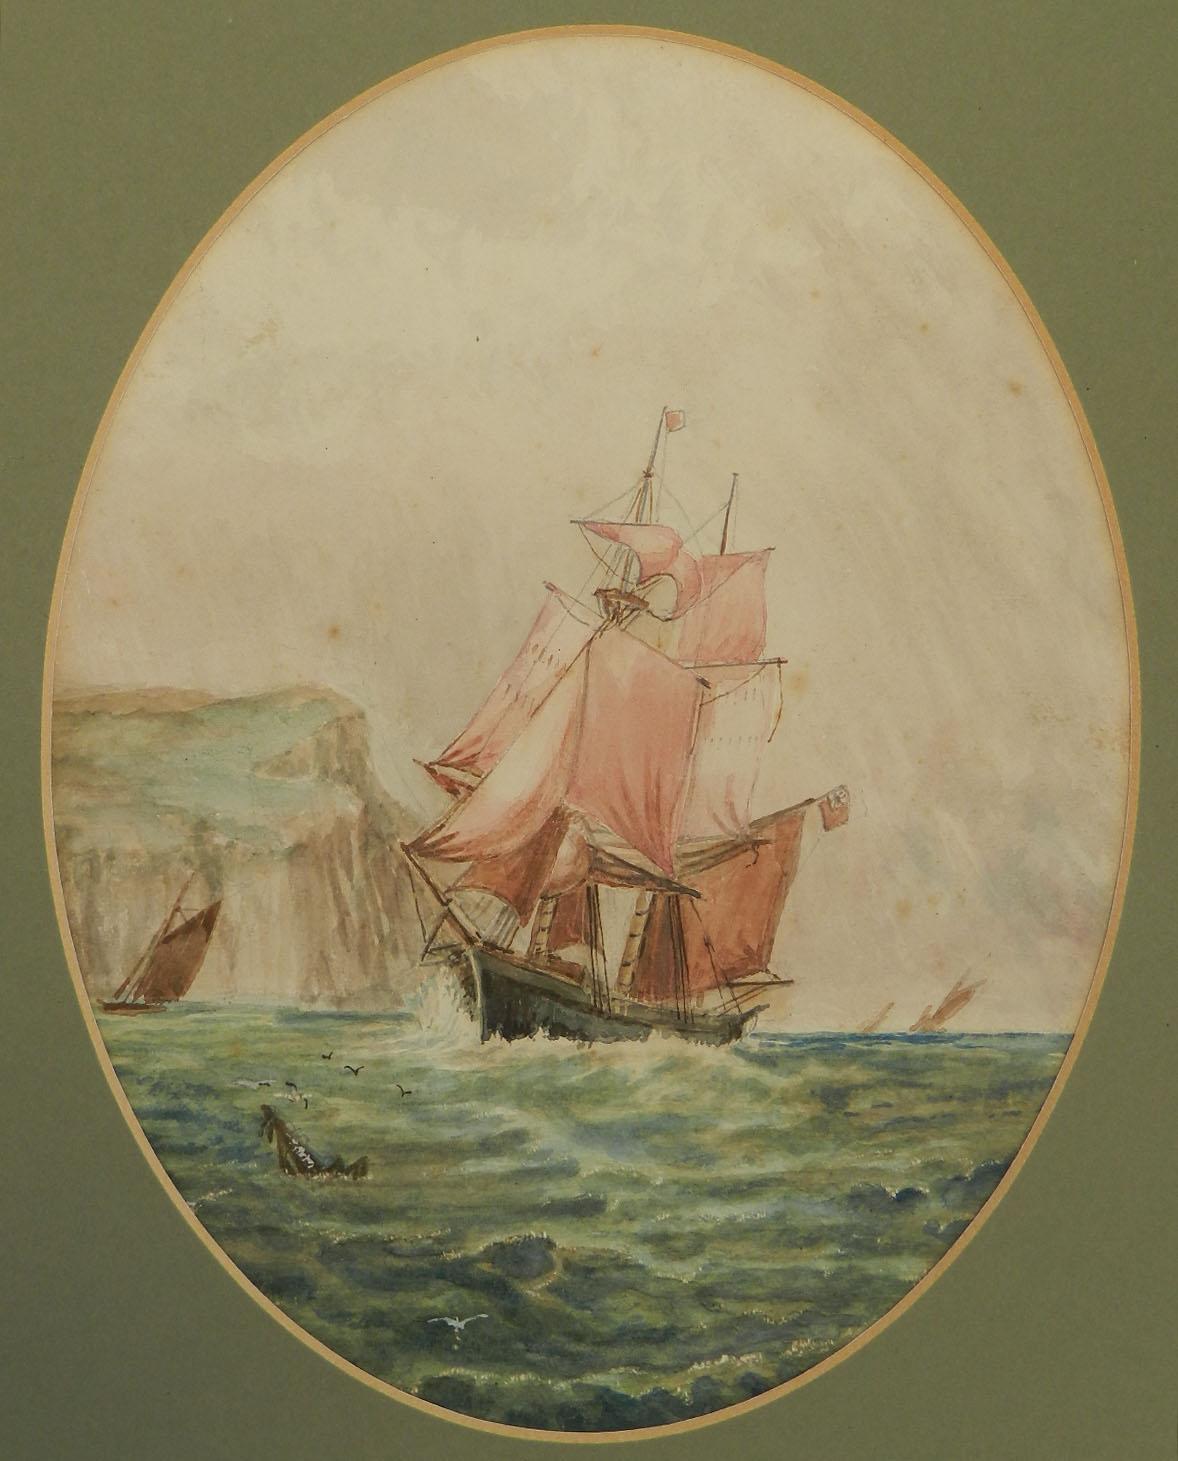 Unknown Landscape Art - Watercolor Sketch Sailing Ship at Sea English Marine by John Moore late 19th Cen